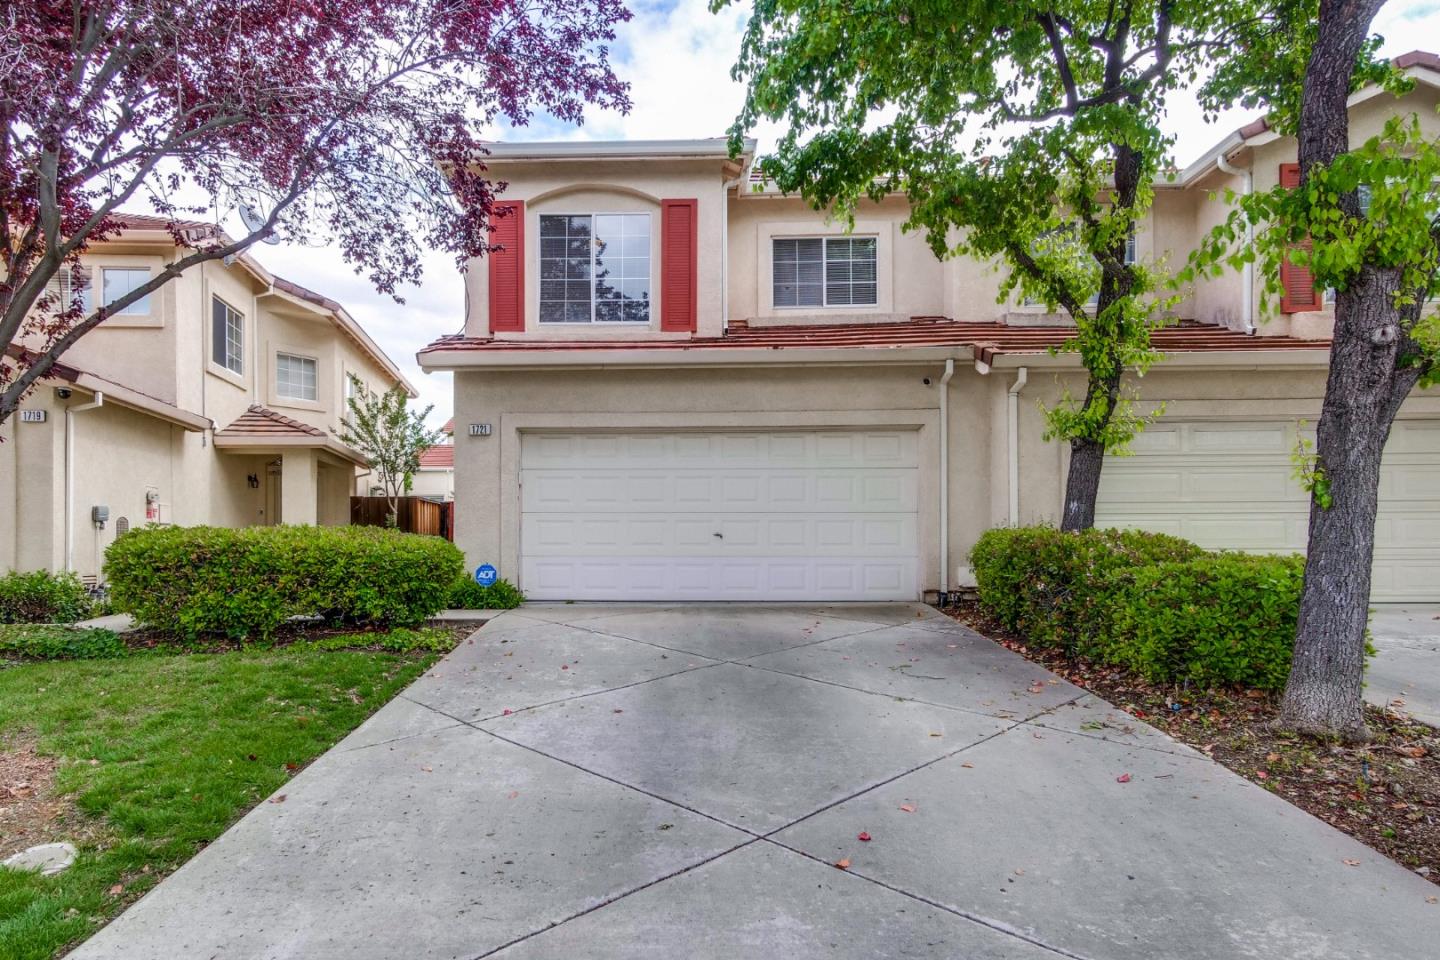 Photo of 1721 Periwinkle Wy in Antioch, CA